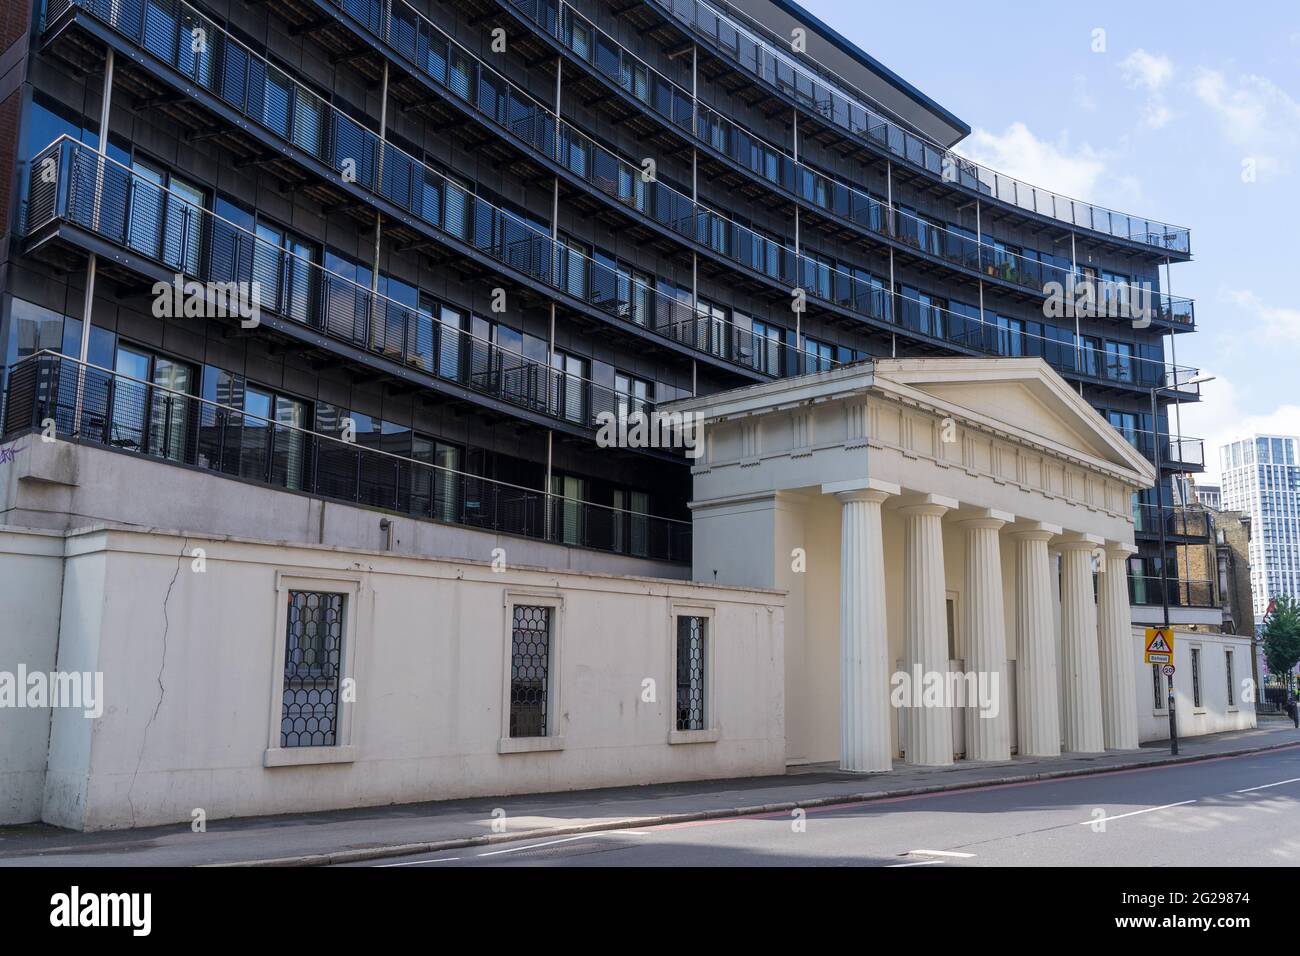 An old white column facade of a building in front of new luxury flats on Stamford Street. London - 5th June 2021 Stock Photo